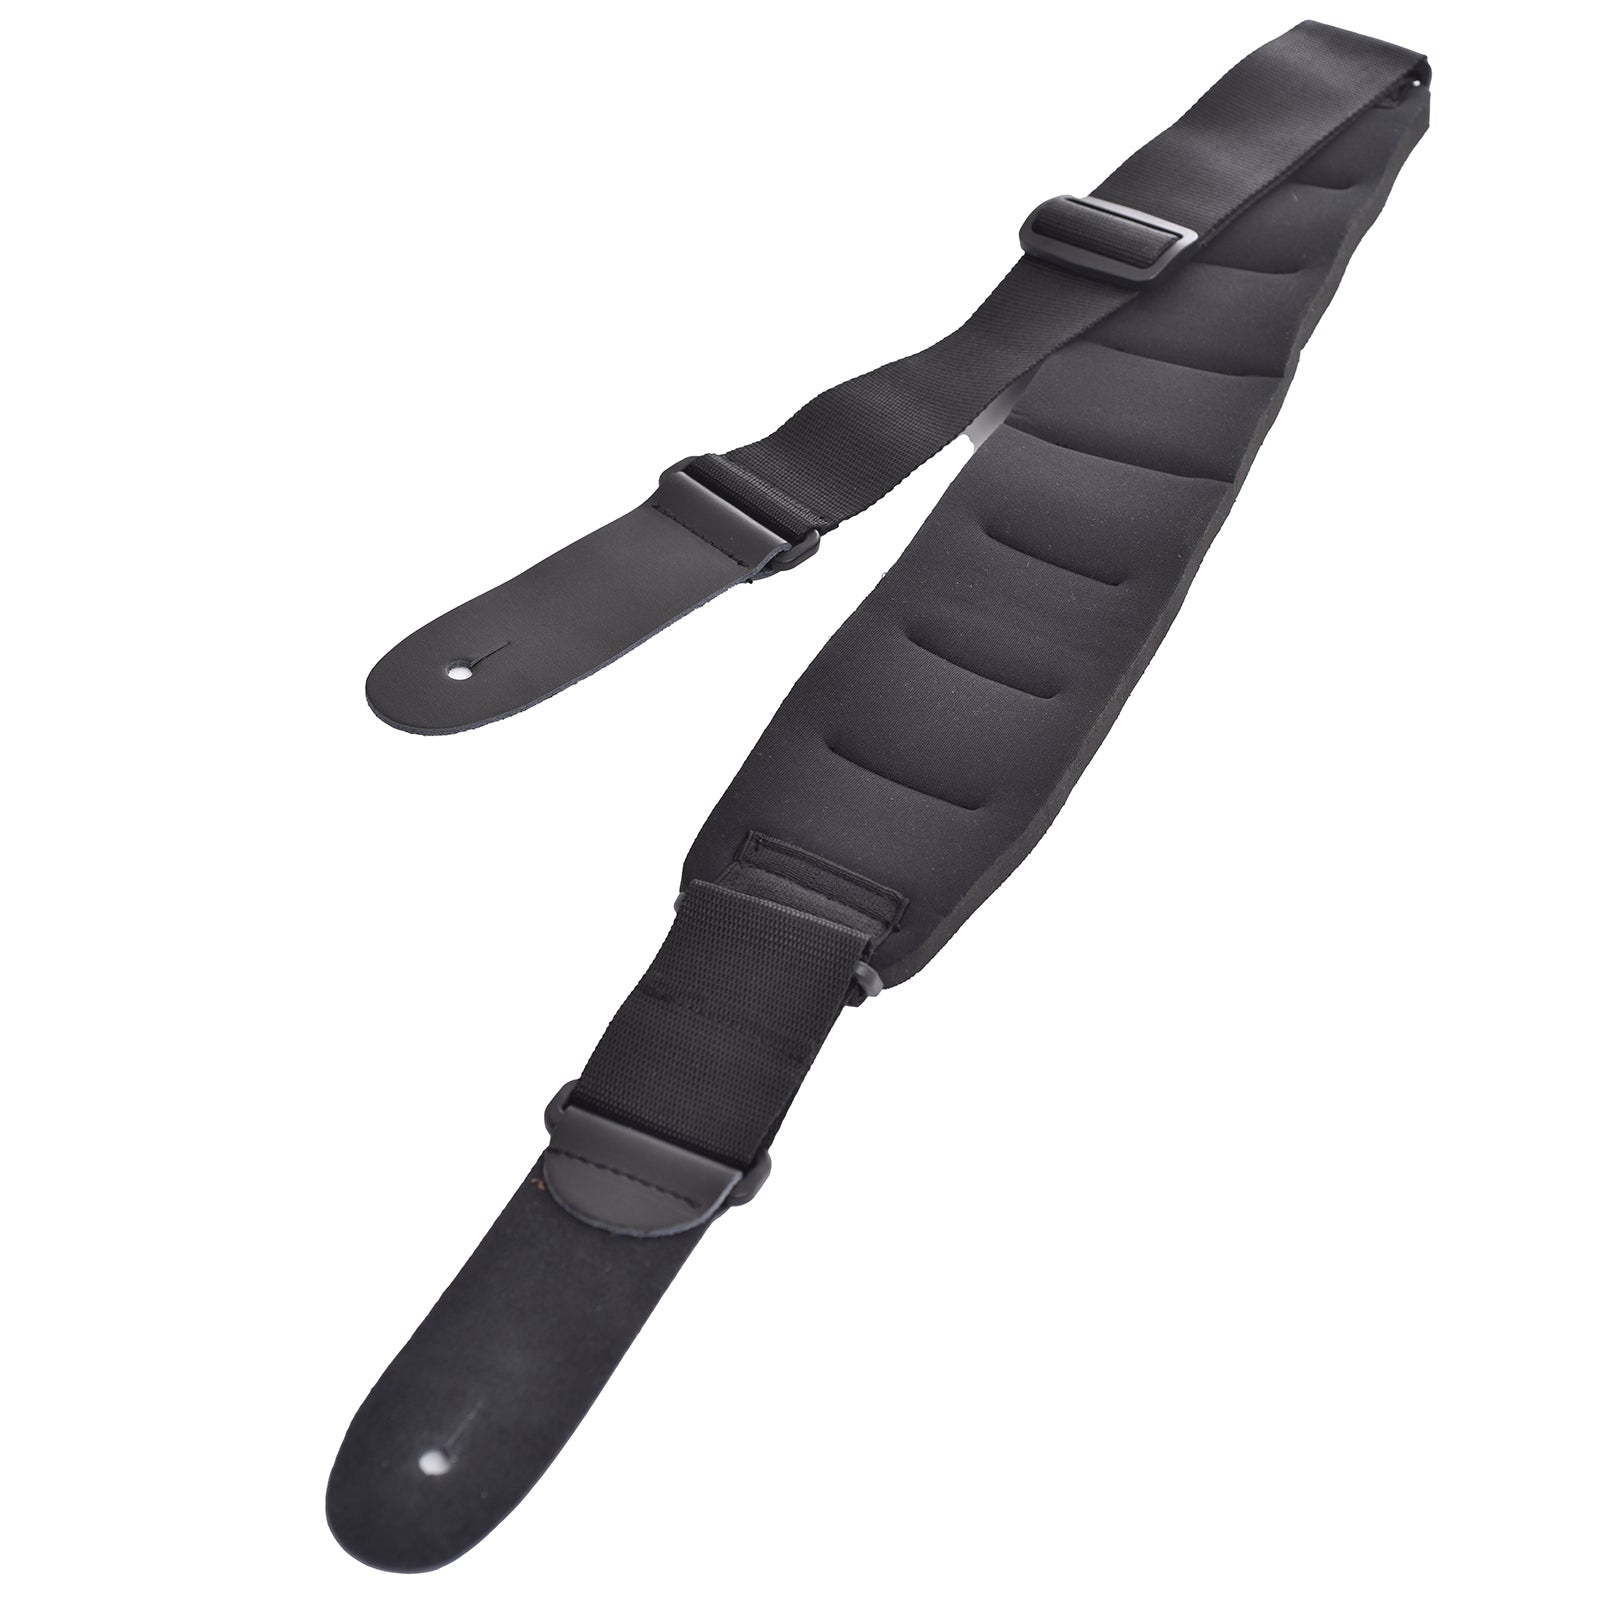 Image 2 of Cool Music Neo Guitar Strap, 3 1/2" - SKU# CMNEO-3 : Product Type Accessories & Parts : Elderly Instruments